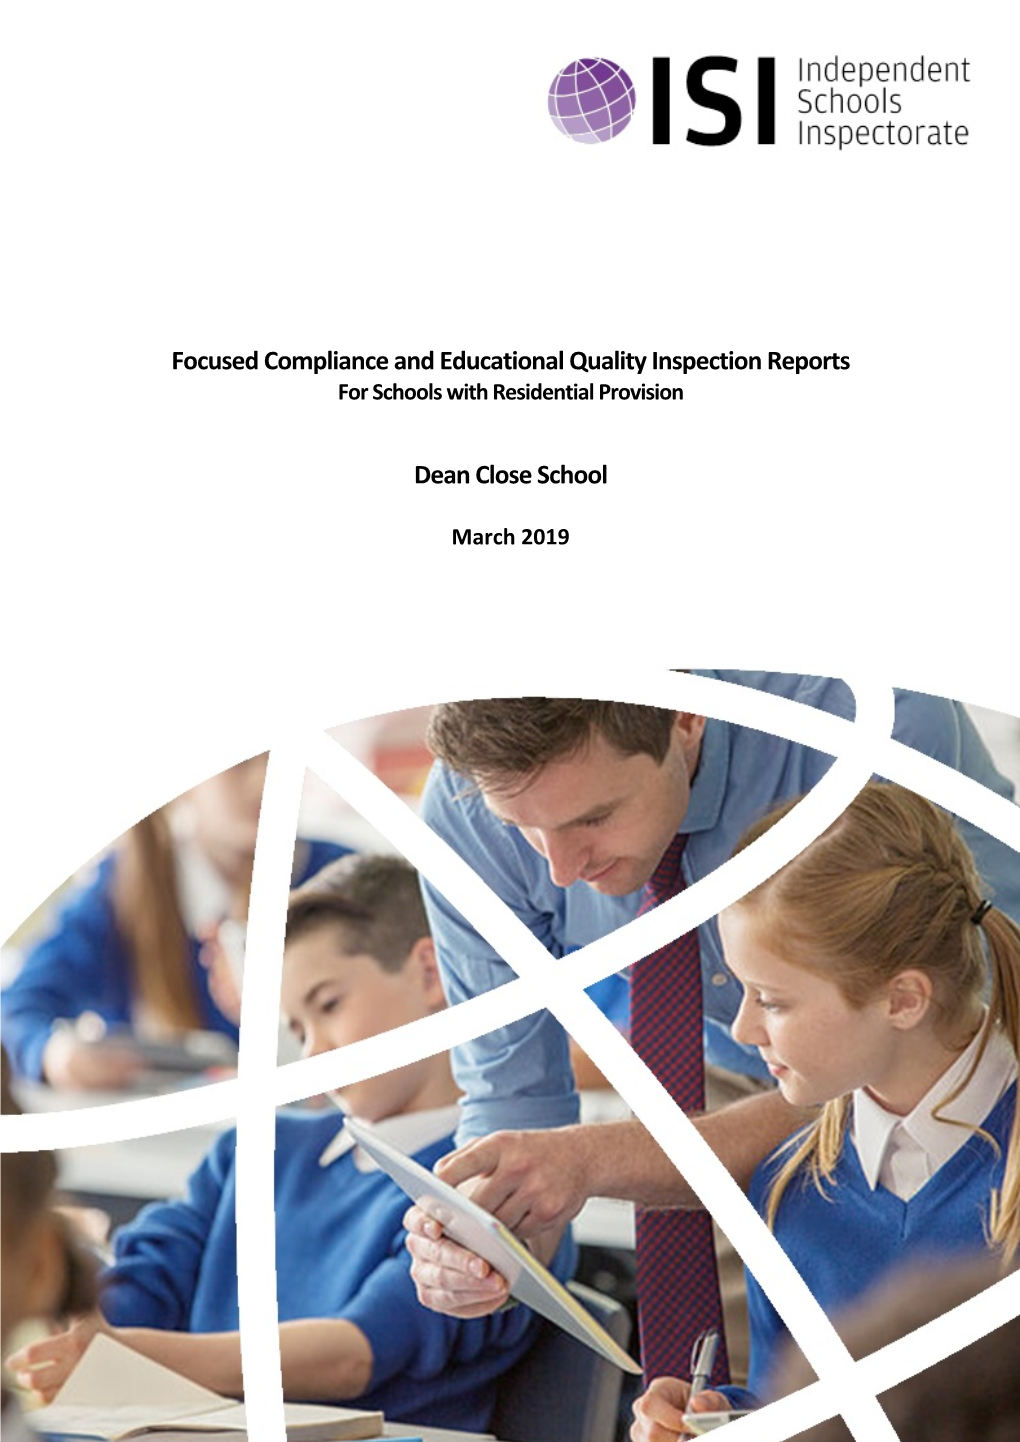 Focused Compliance and Educational Quality Inspection Reports for Schools with Residential Provision